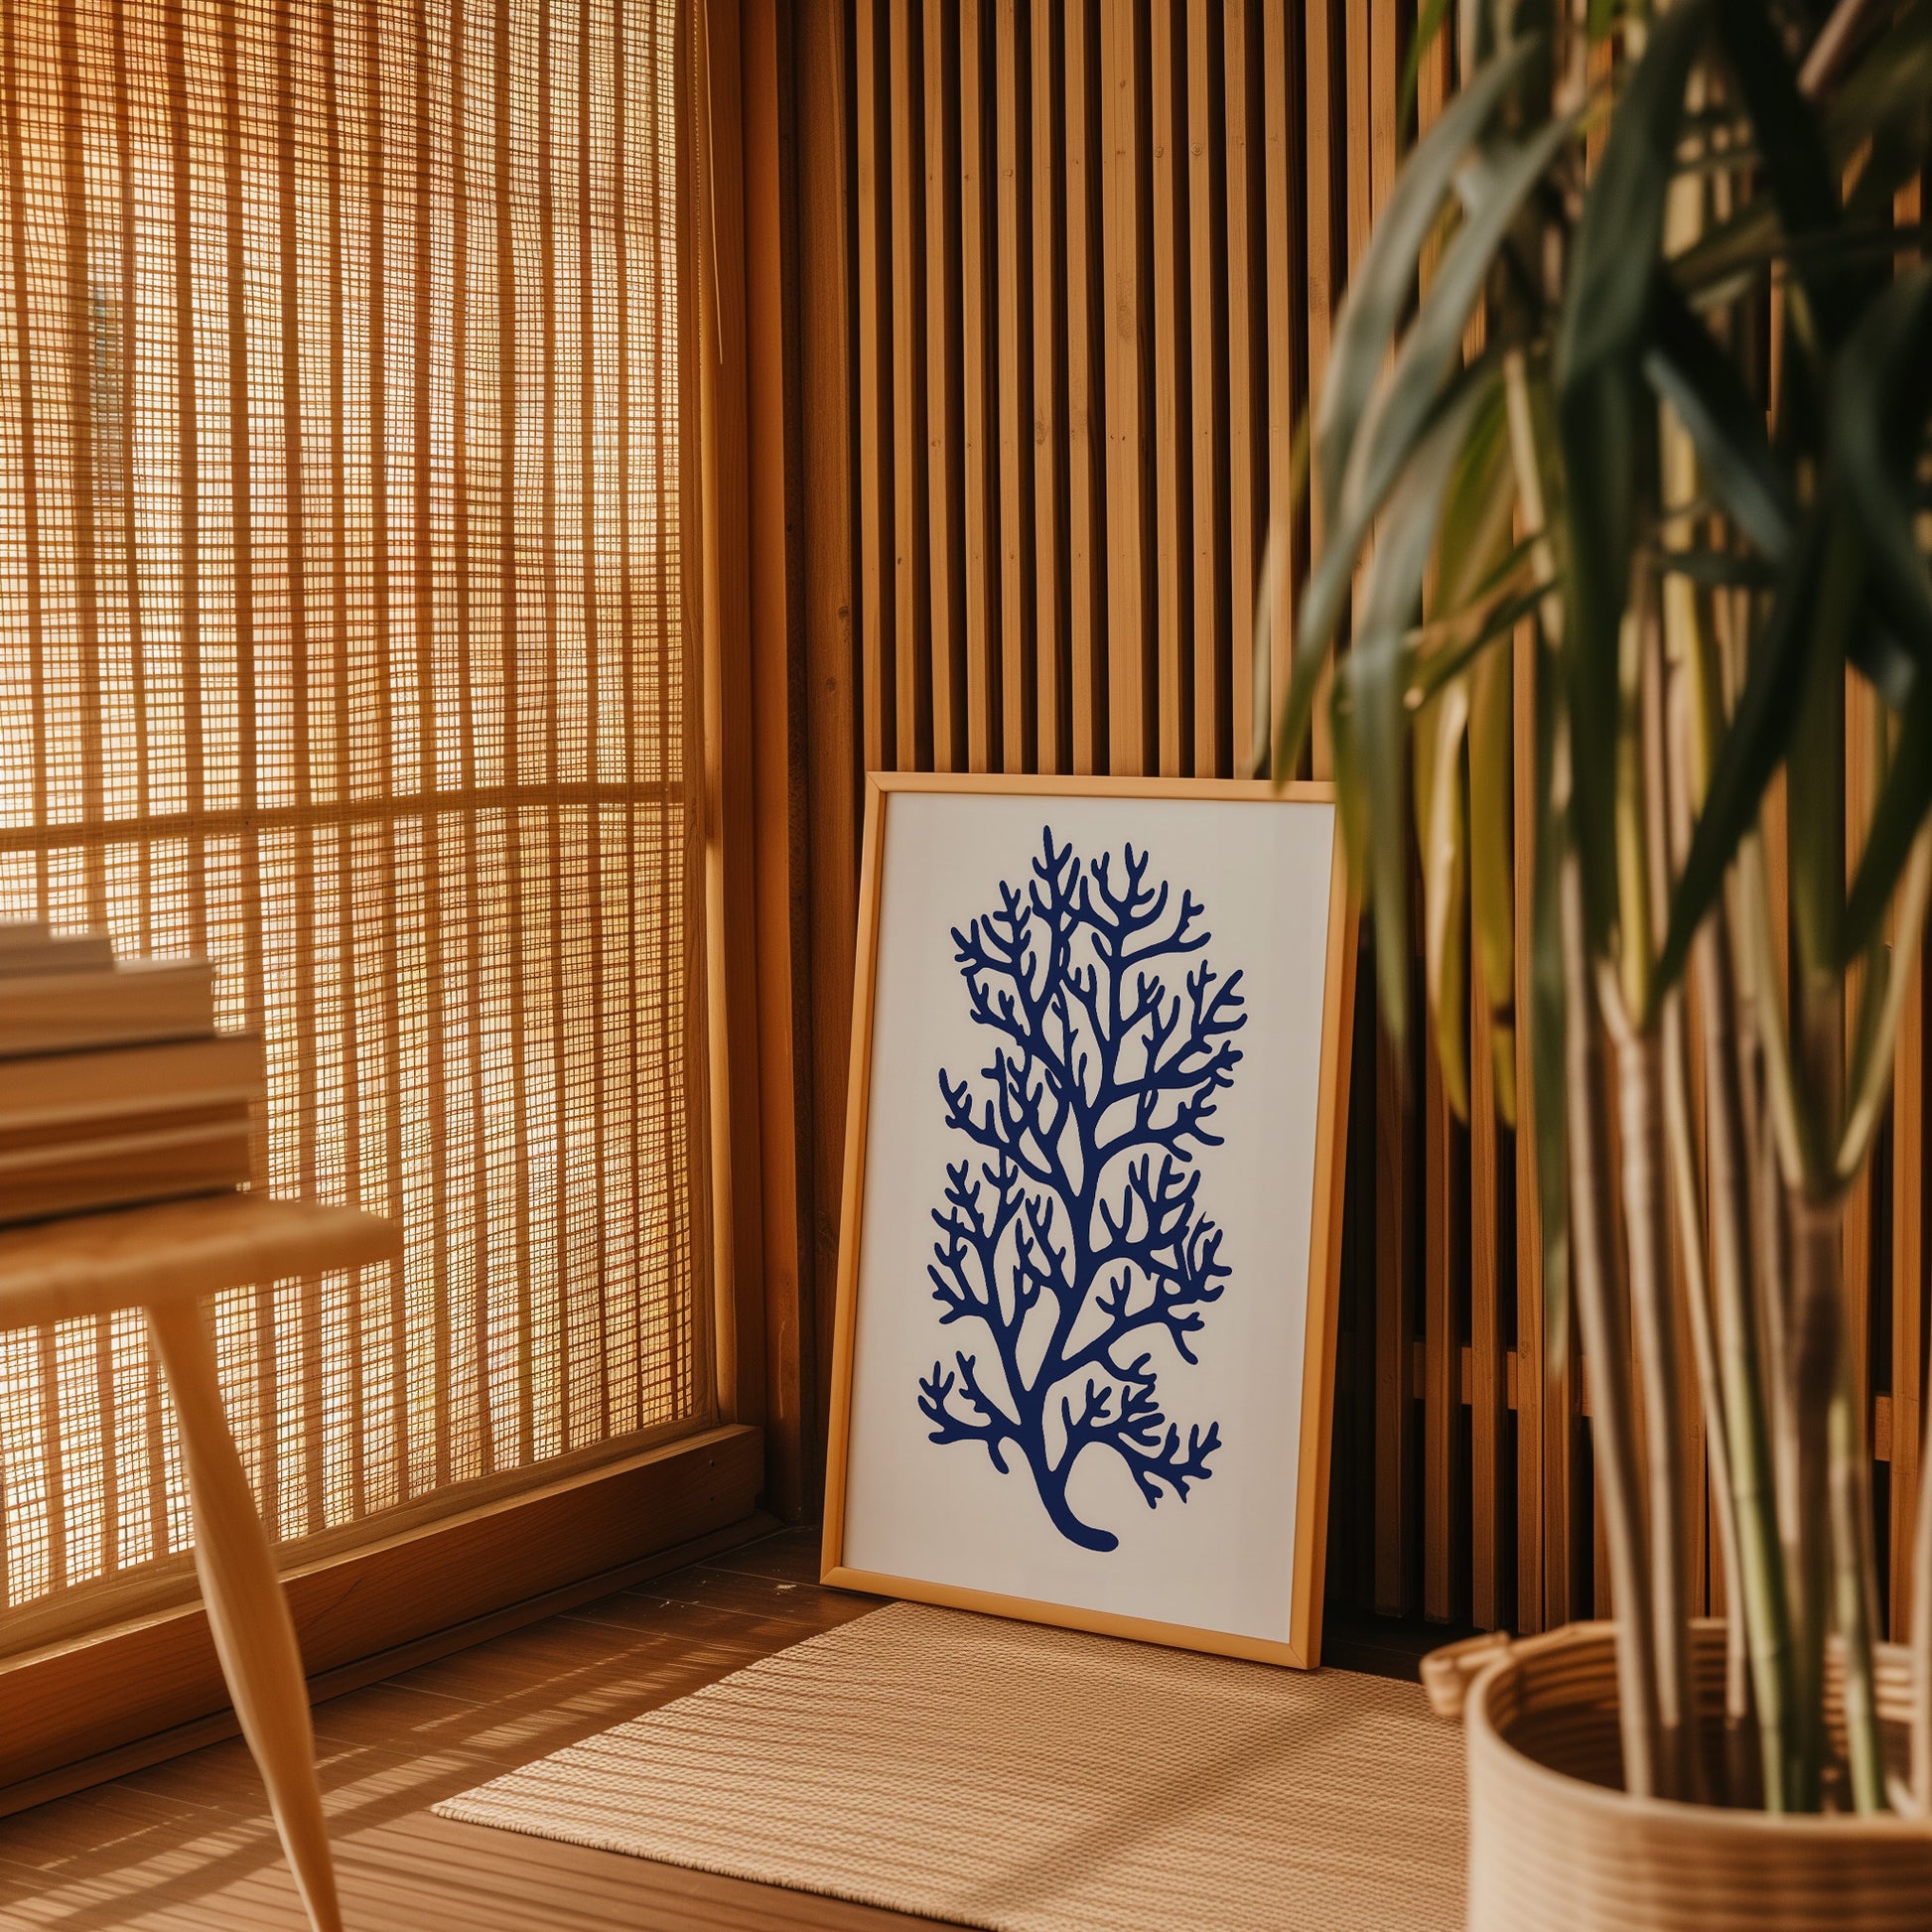 A framed picture of a blue coral on the floor next to a potted plant, with bamboo shades in the background.